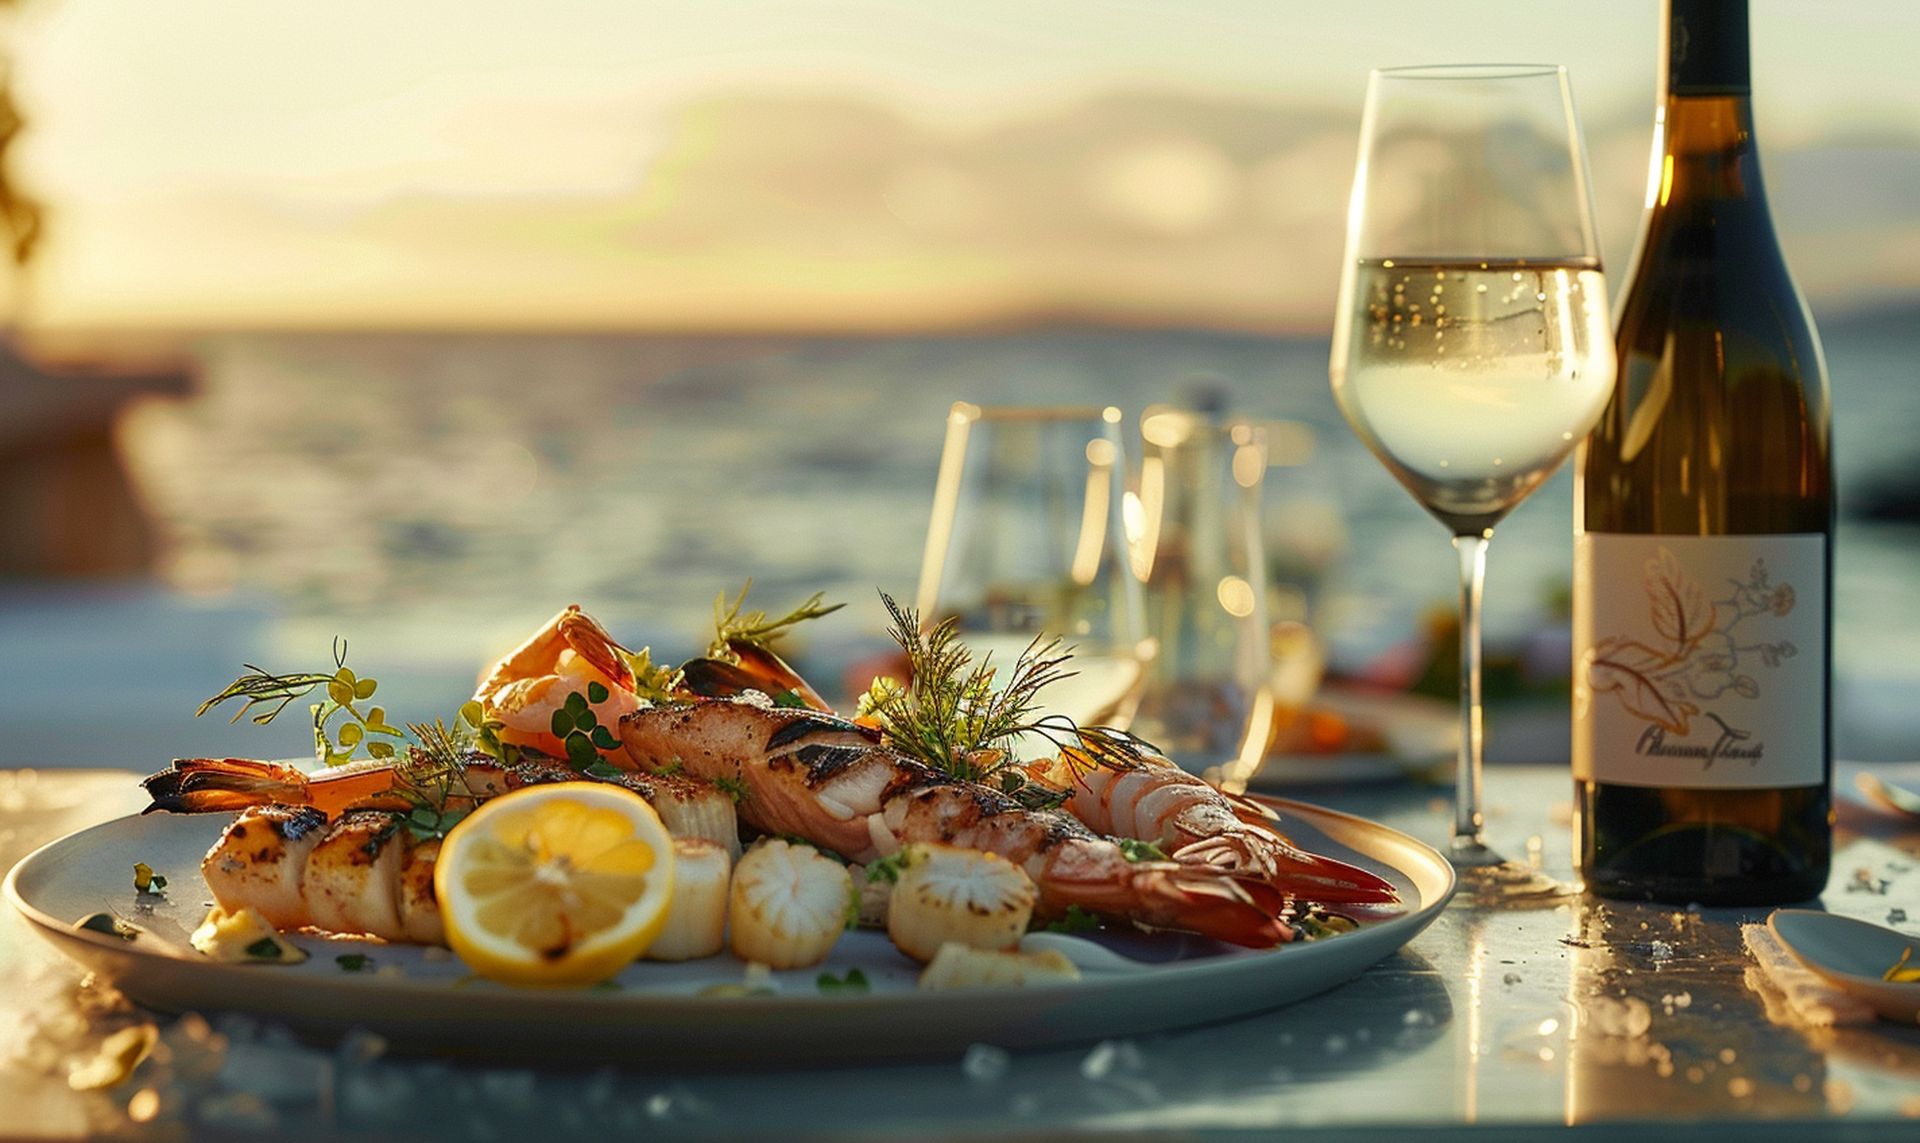 Sauvignon Blanc Food Pairings: a luxurious seaside dining setup at sunset, capturing a sophisticated table setting that features a chilled bottle of high-quality Sauvignon Blanc with a glistening glass beside it.